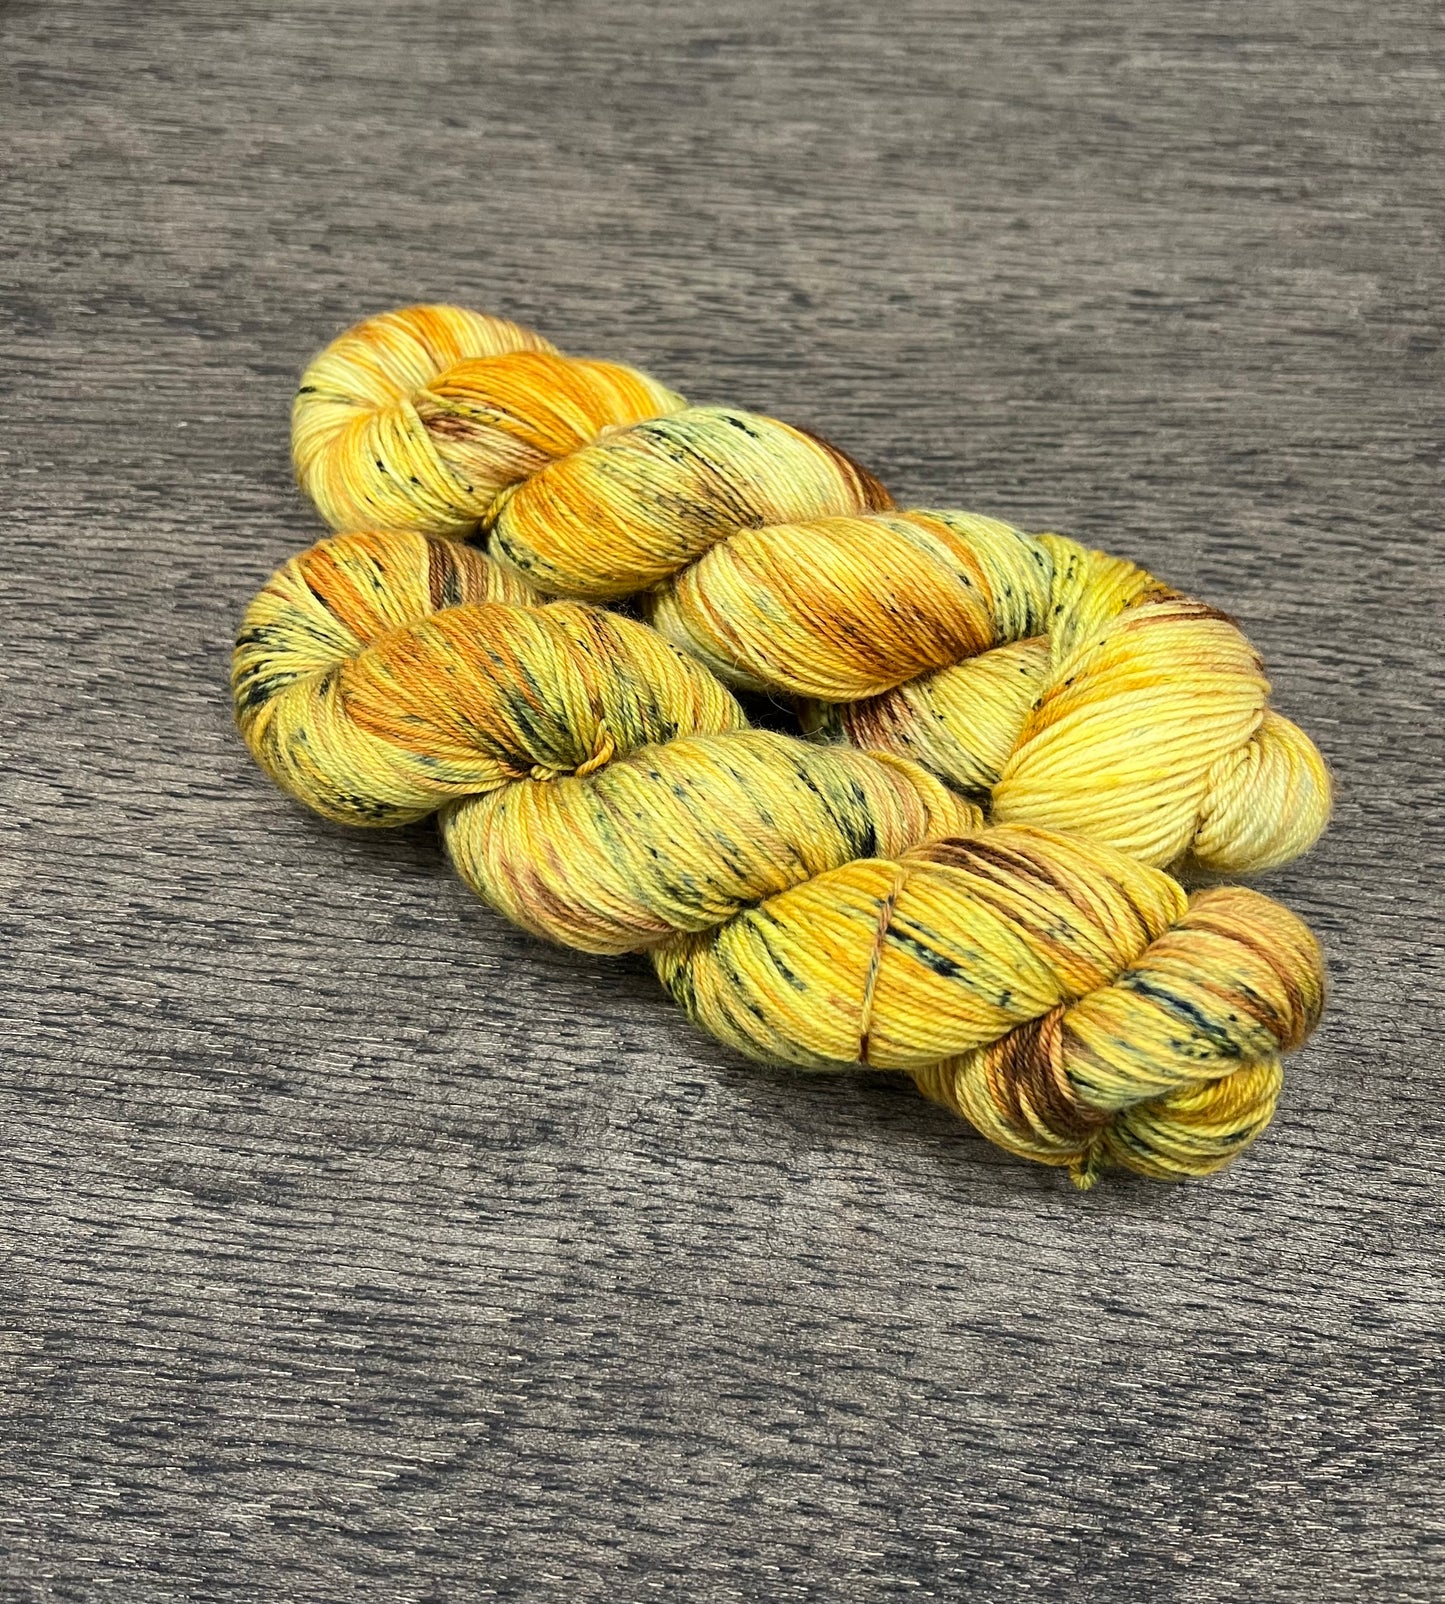 Hand Dyed Yarn Club Monthly Subscription OUTLANDER inspired Knitting Crochet Gift JULY Mystery Skein for Crafter